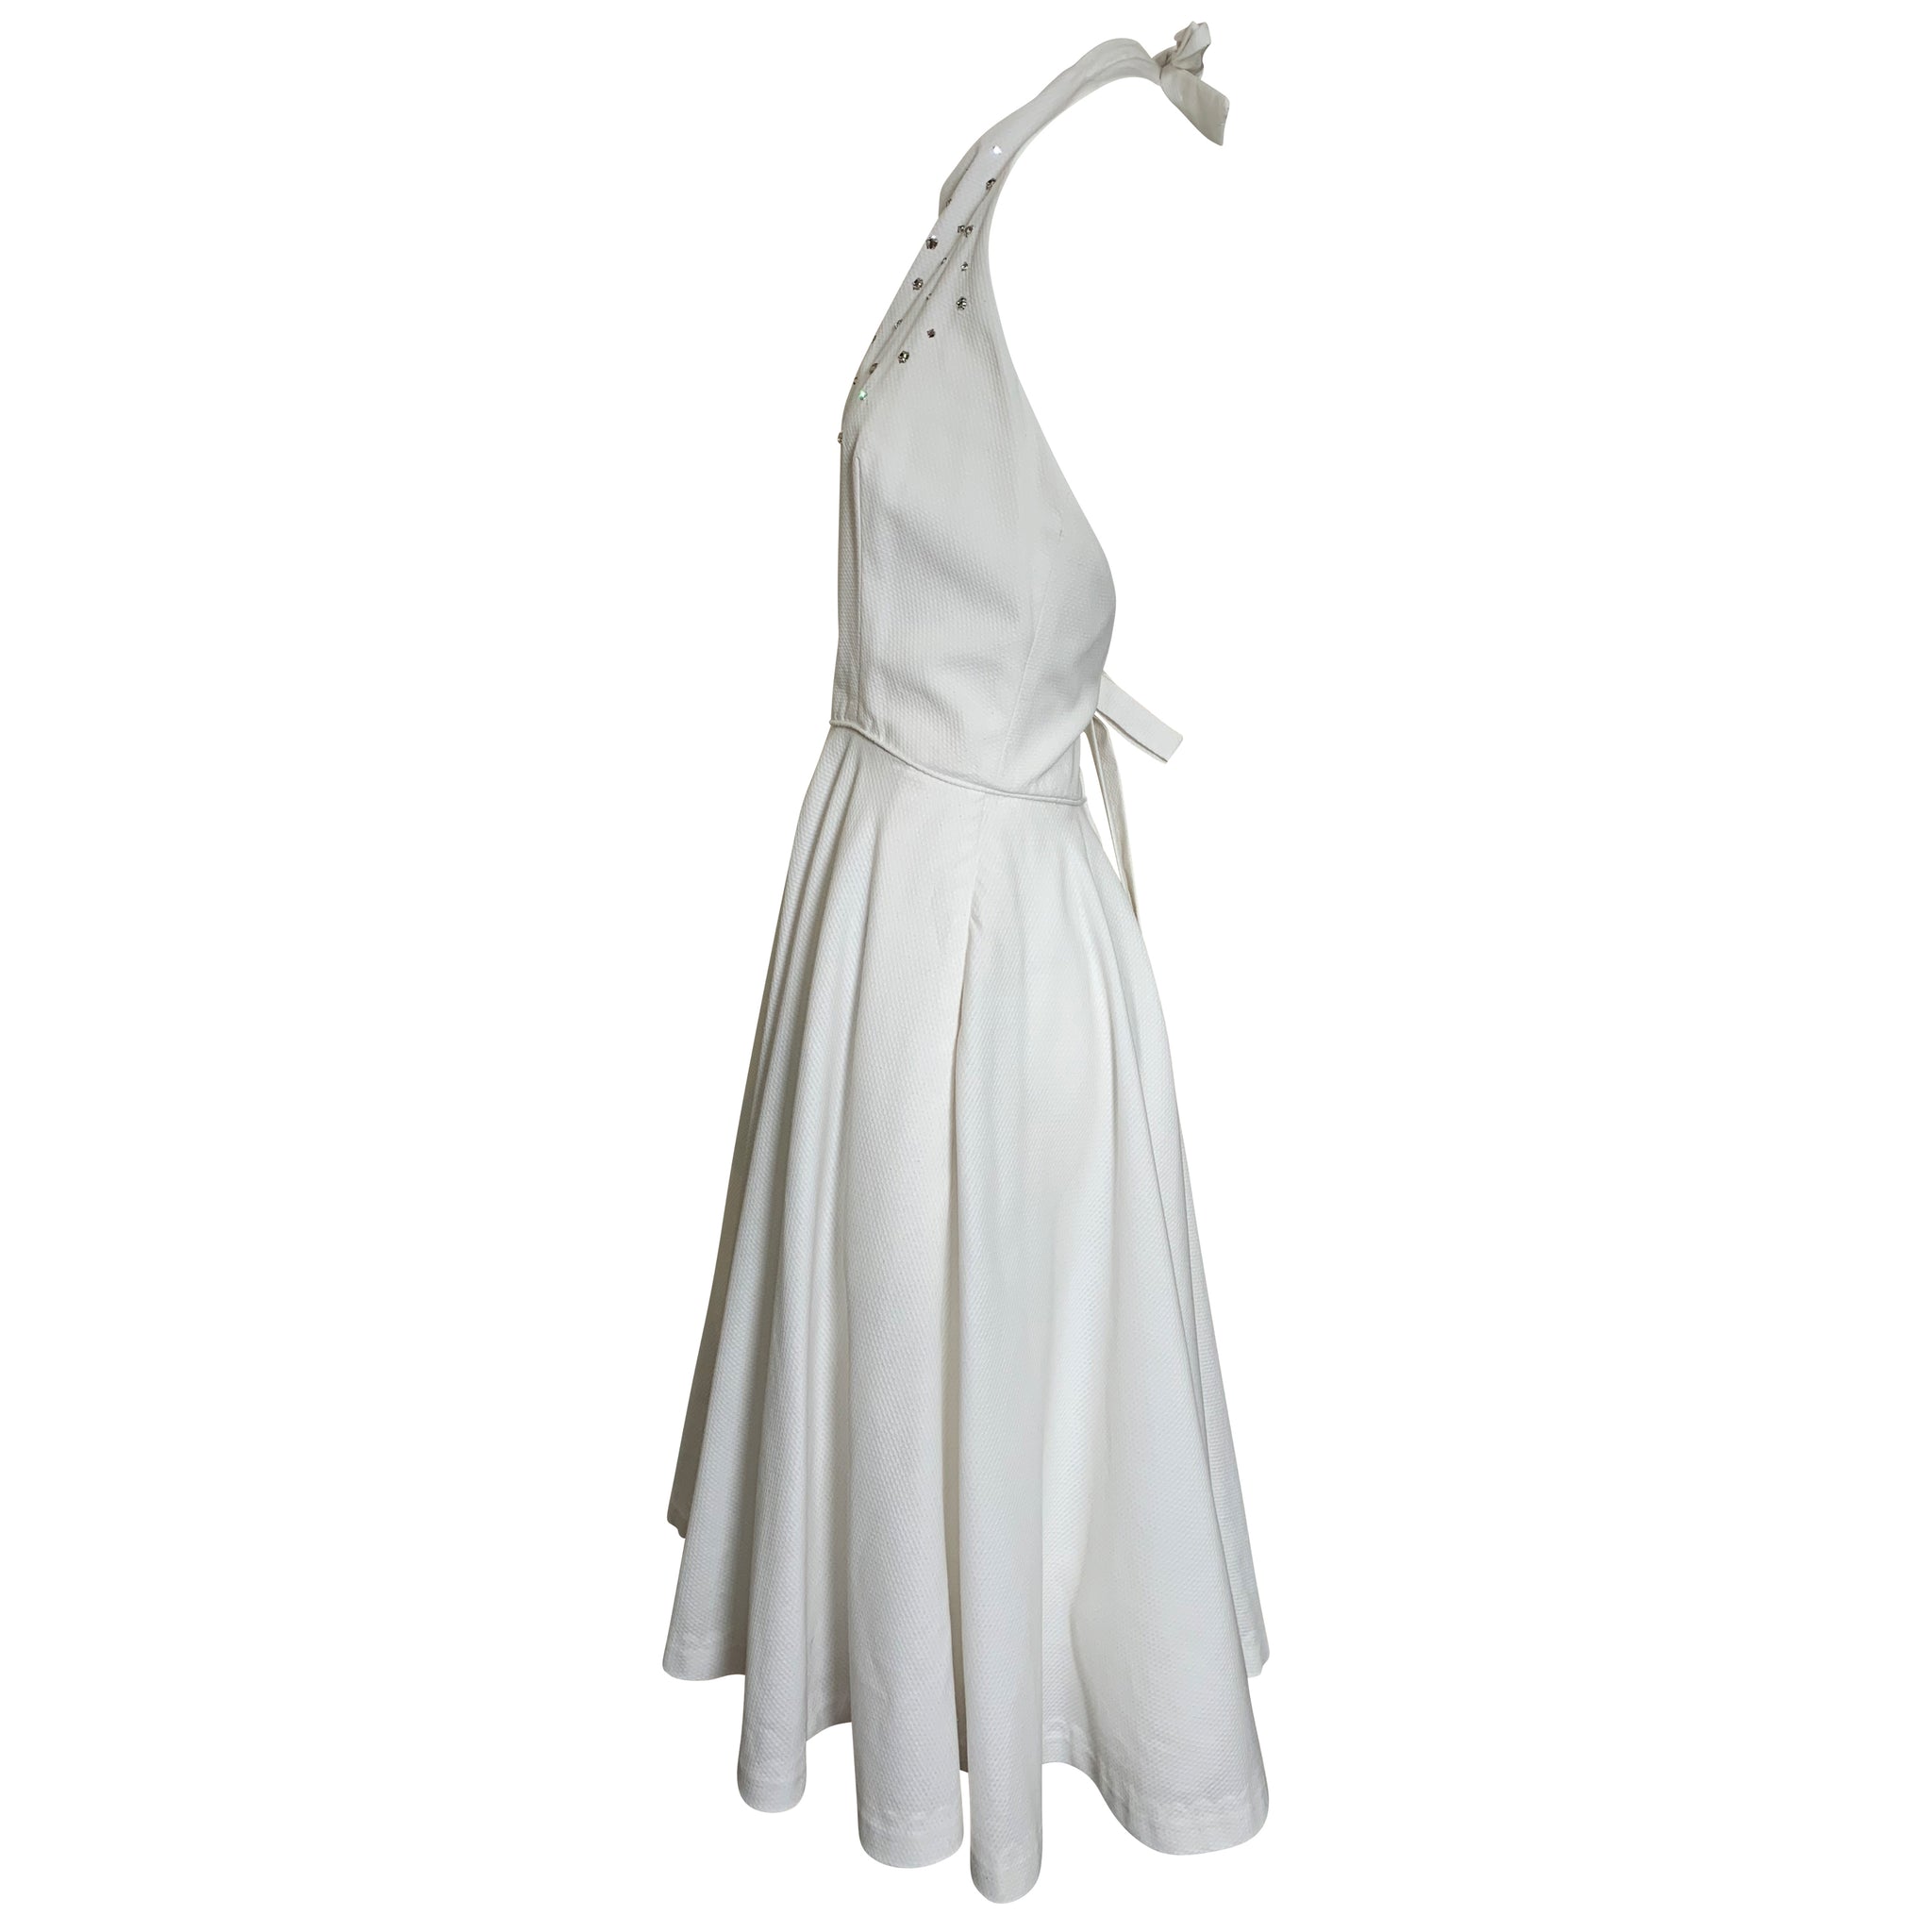 1980s Does 1950s White Pique Halter Dress SIDE 2 of 5